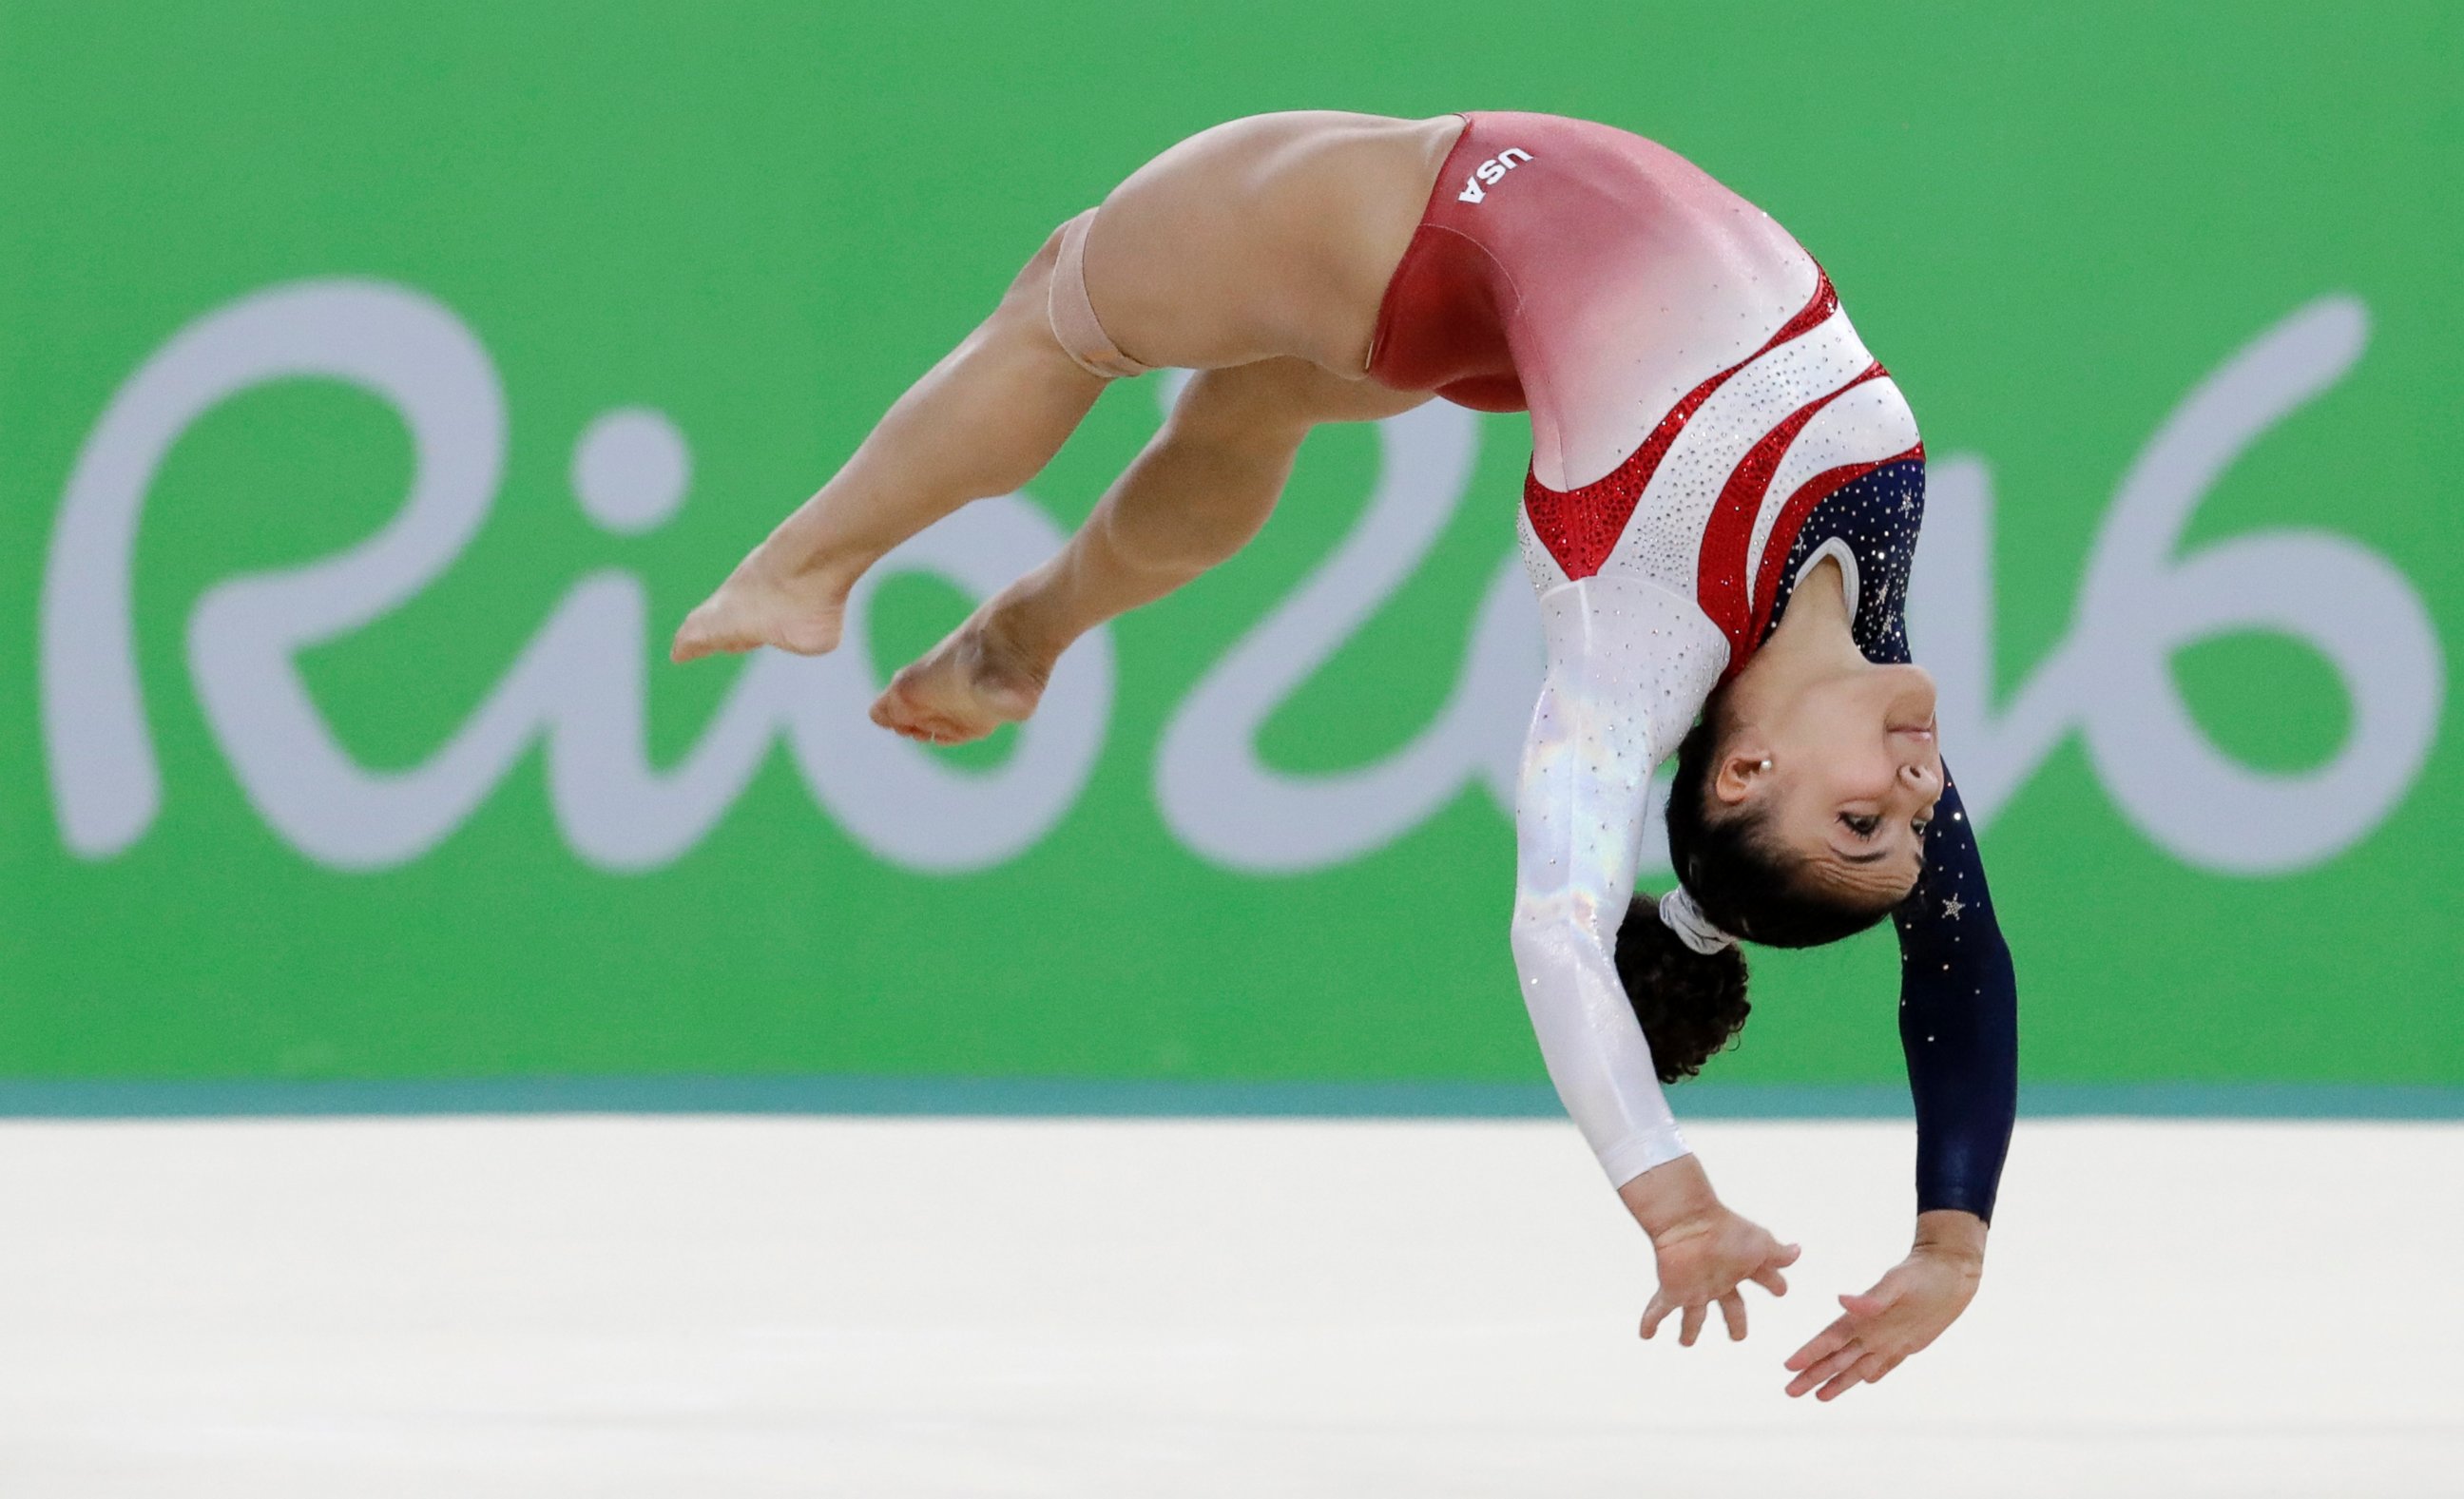 PHOTO: United States' Lauren Hernandez performs on the floor during the artistic gymnastics women's team final at the 2016 Summer Olympics in Rio de Janeiro, Brazil, Aug. 9, 2016.